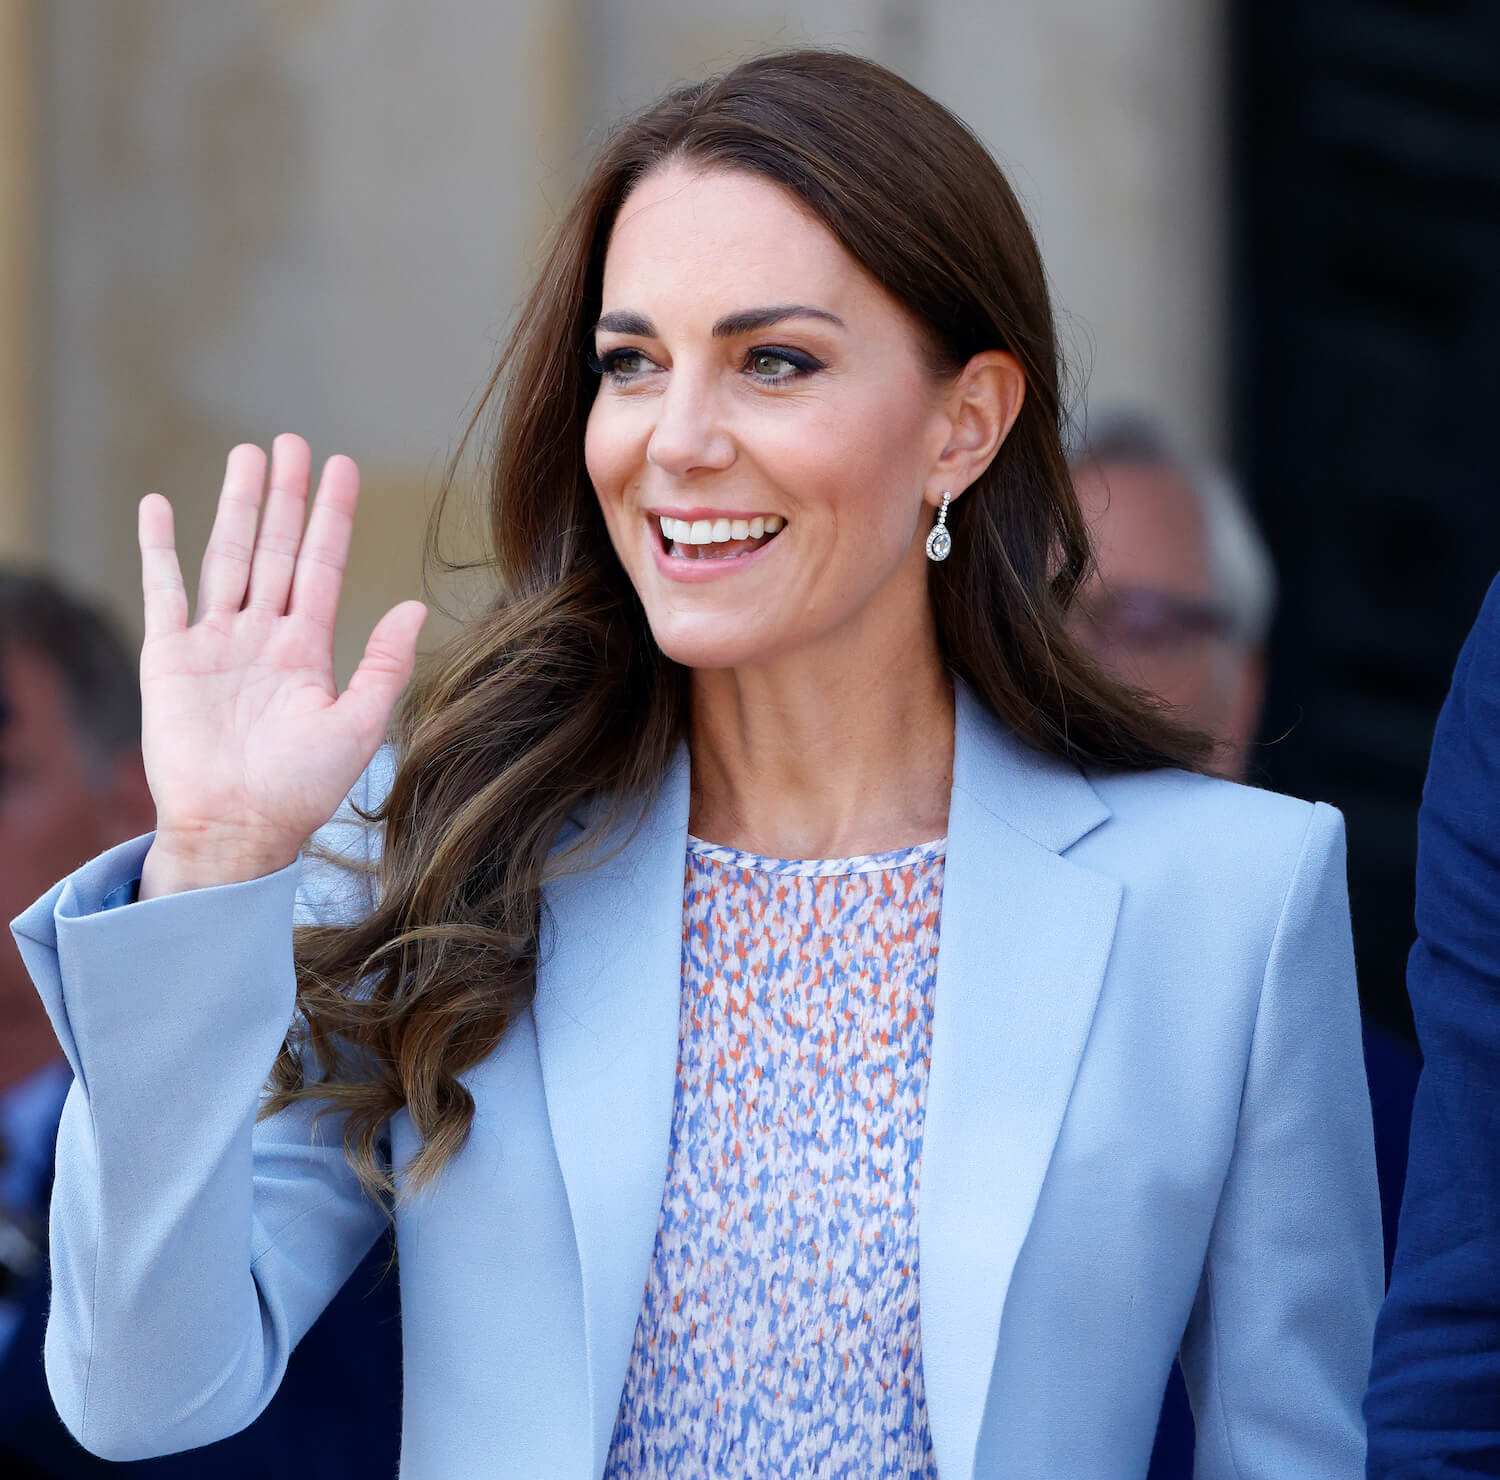 Kate Middleton sports natural hair and makeup and waves, wearing a light blue jacket